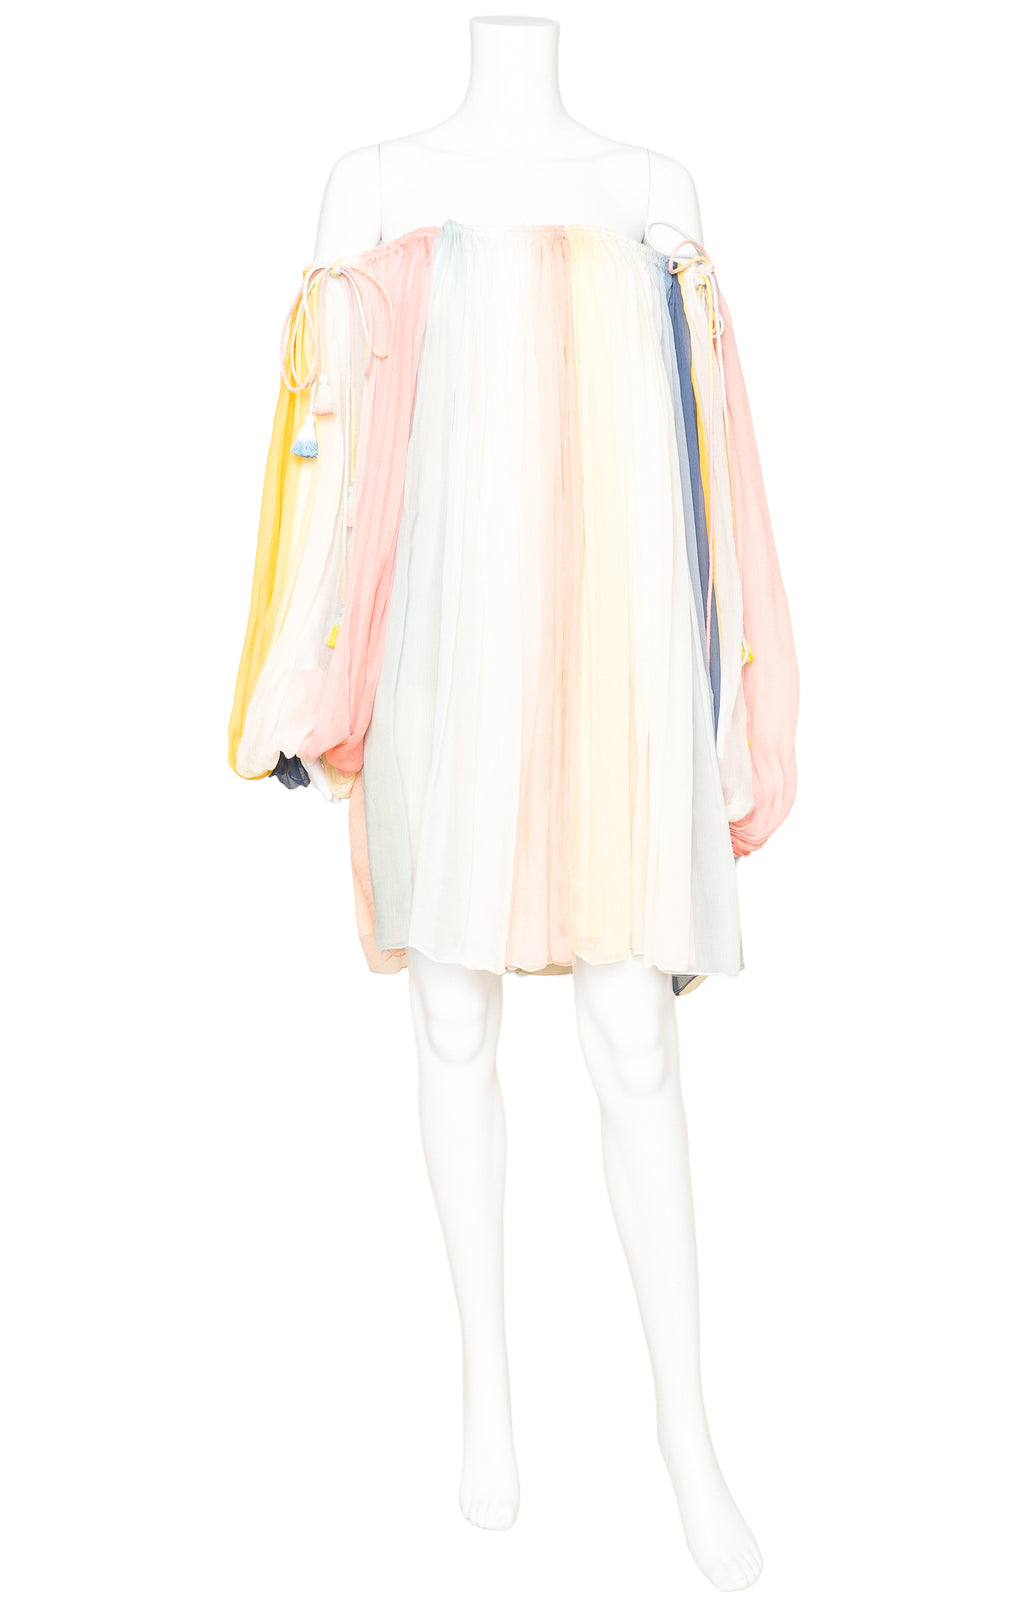 CHLOÉ (RARE) Dress Size: FR 40 / Comparable to US 6-8